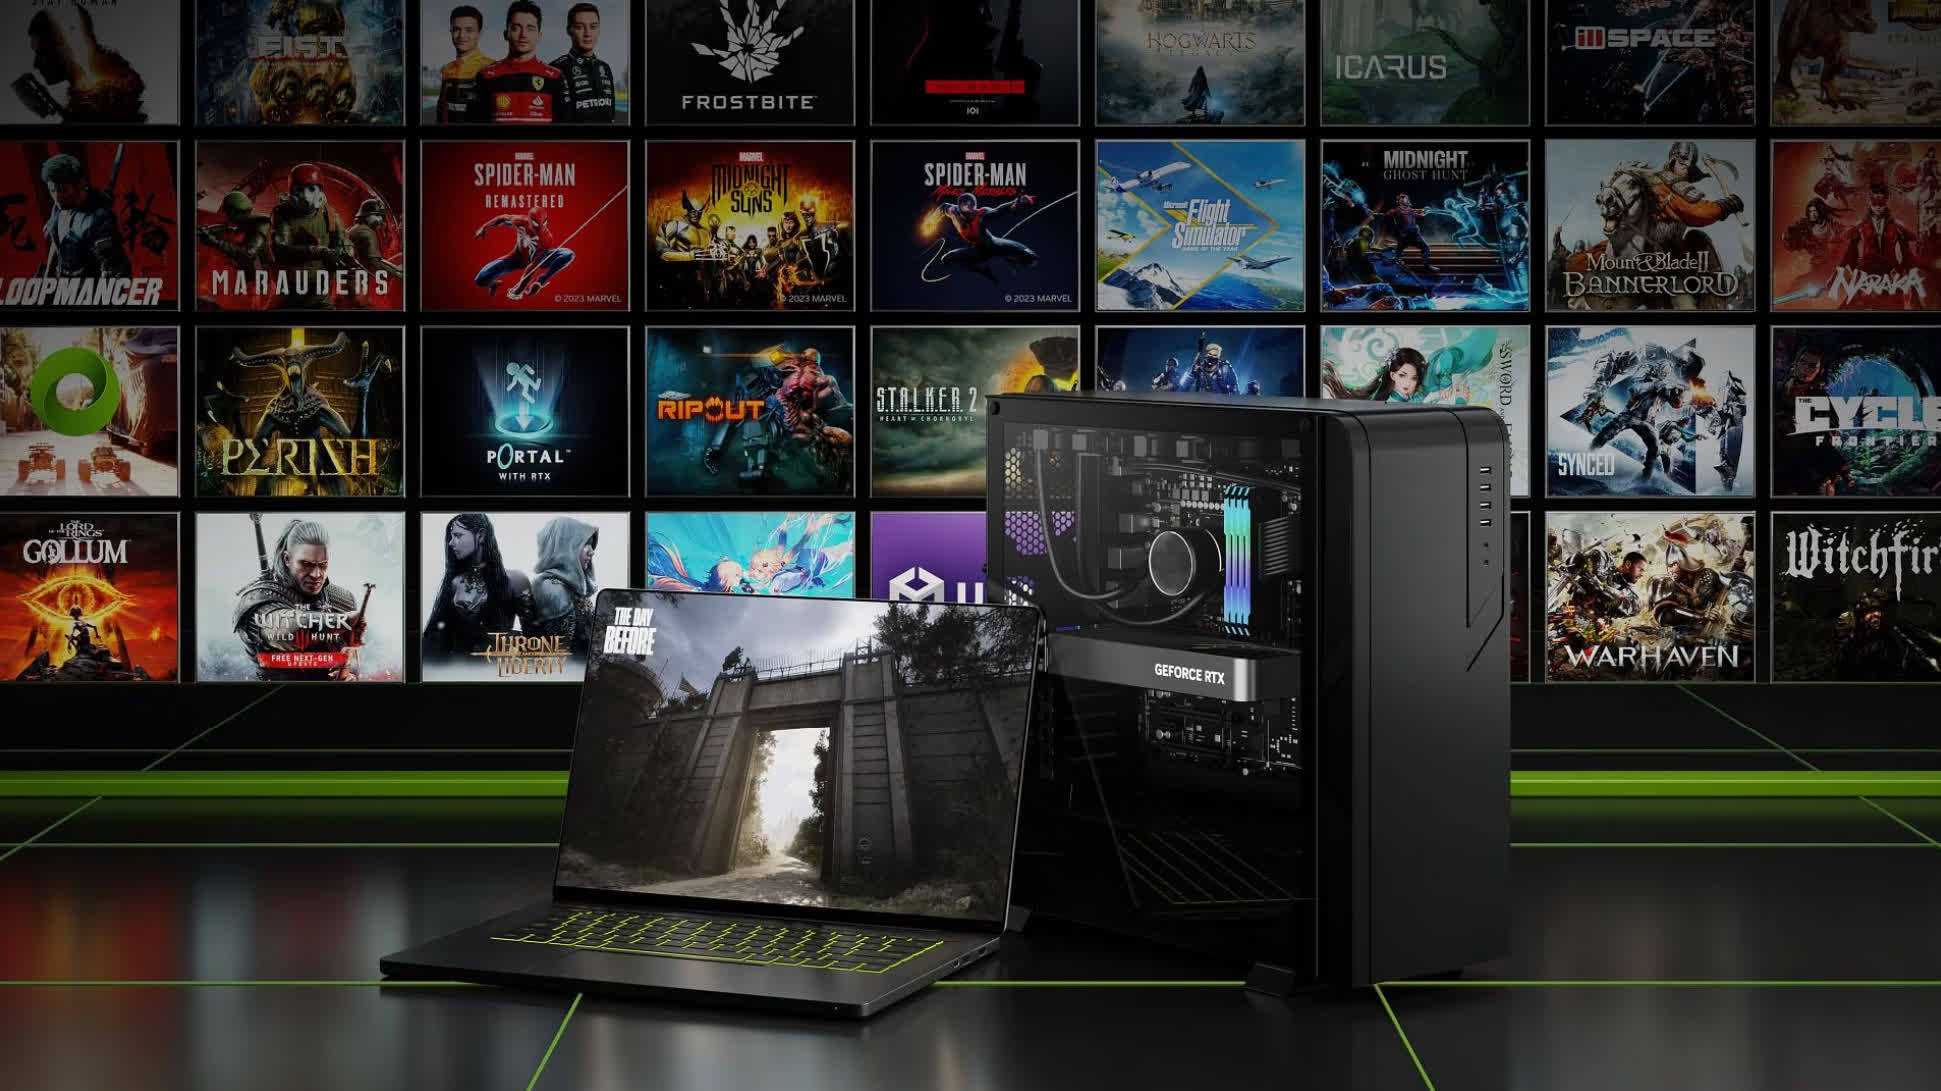 GeForce Now will shut down in Russia over quality concerns and the political situation